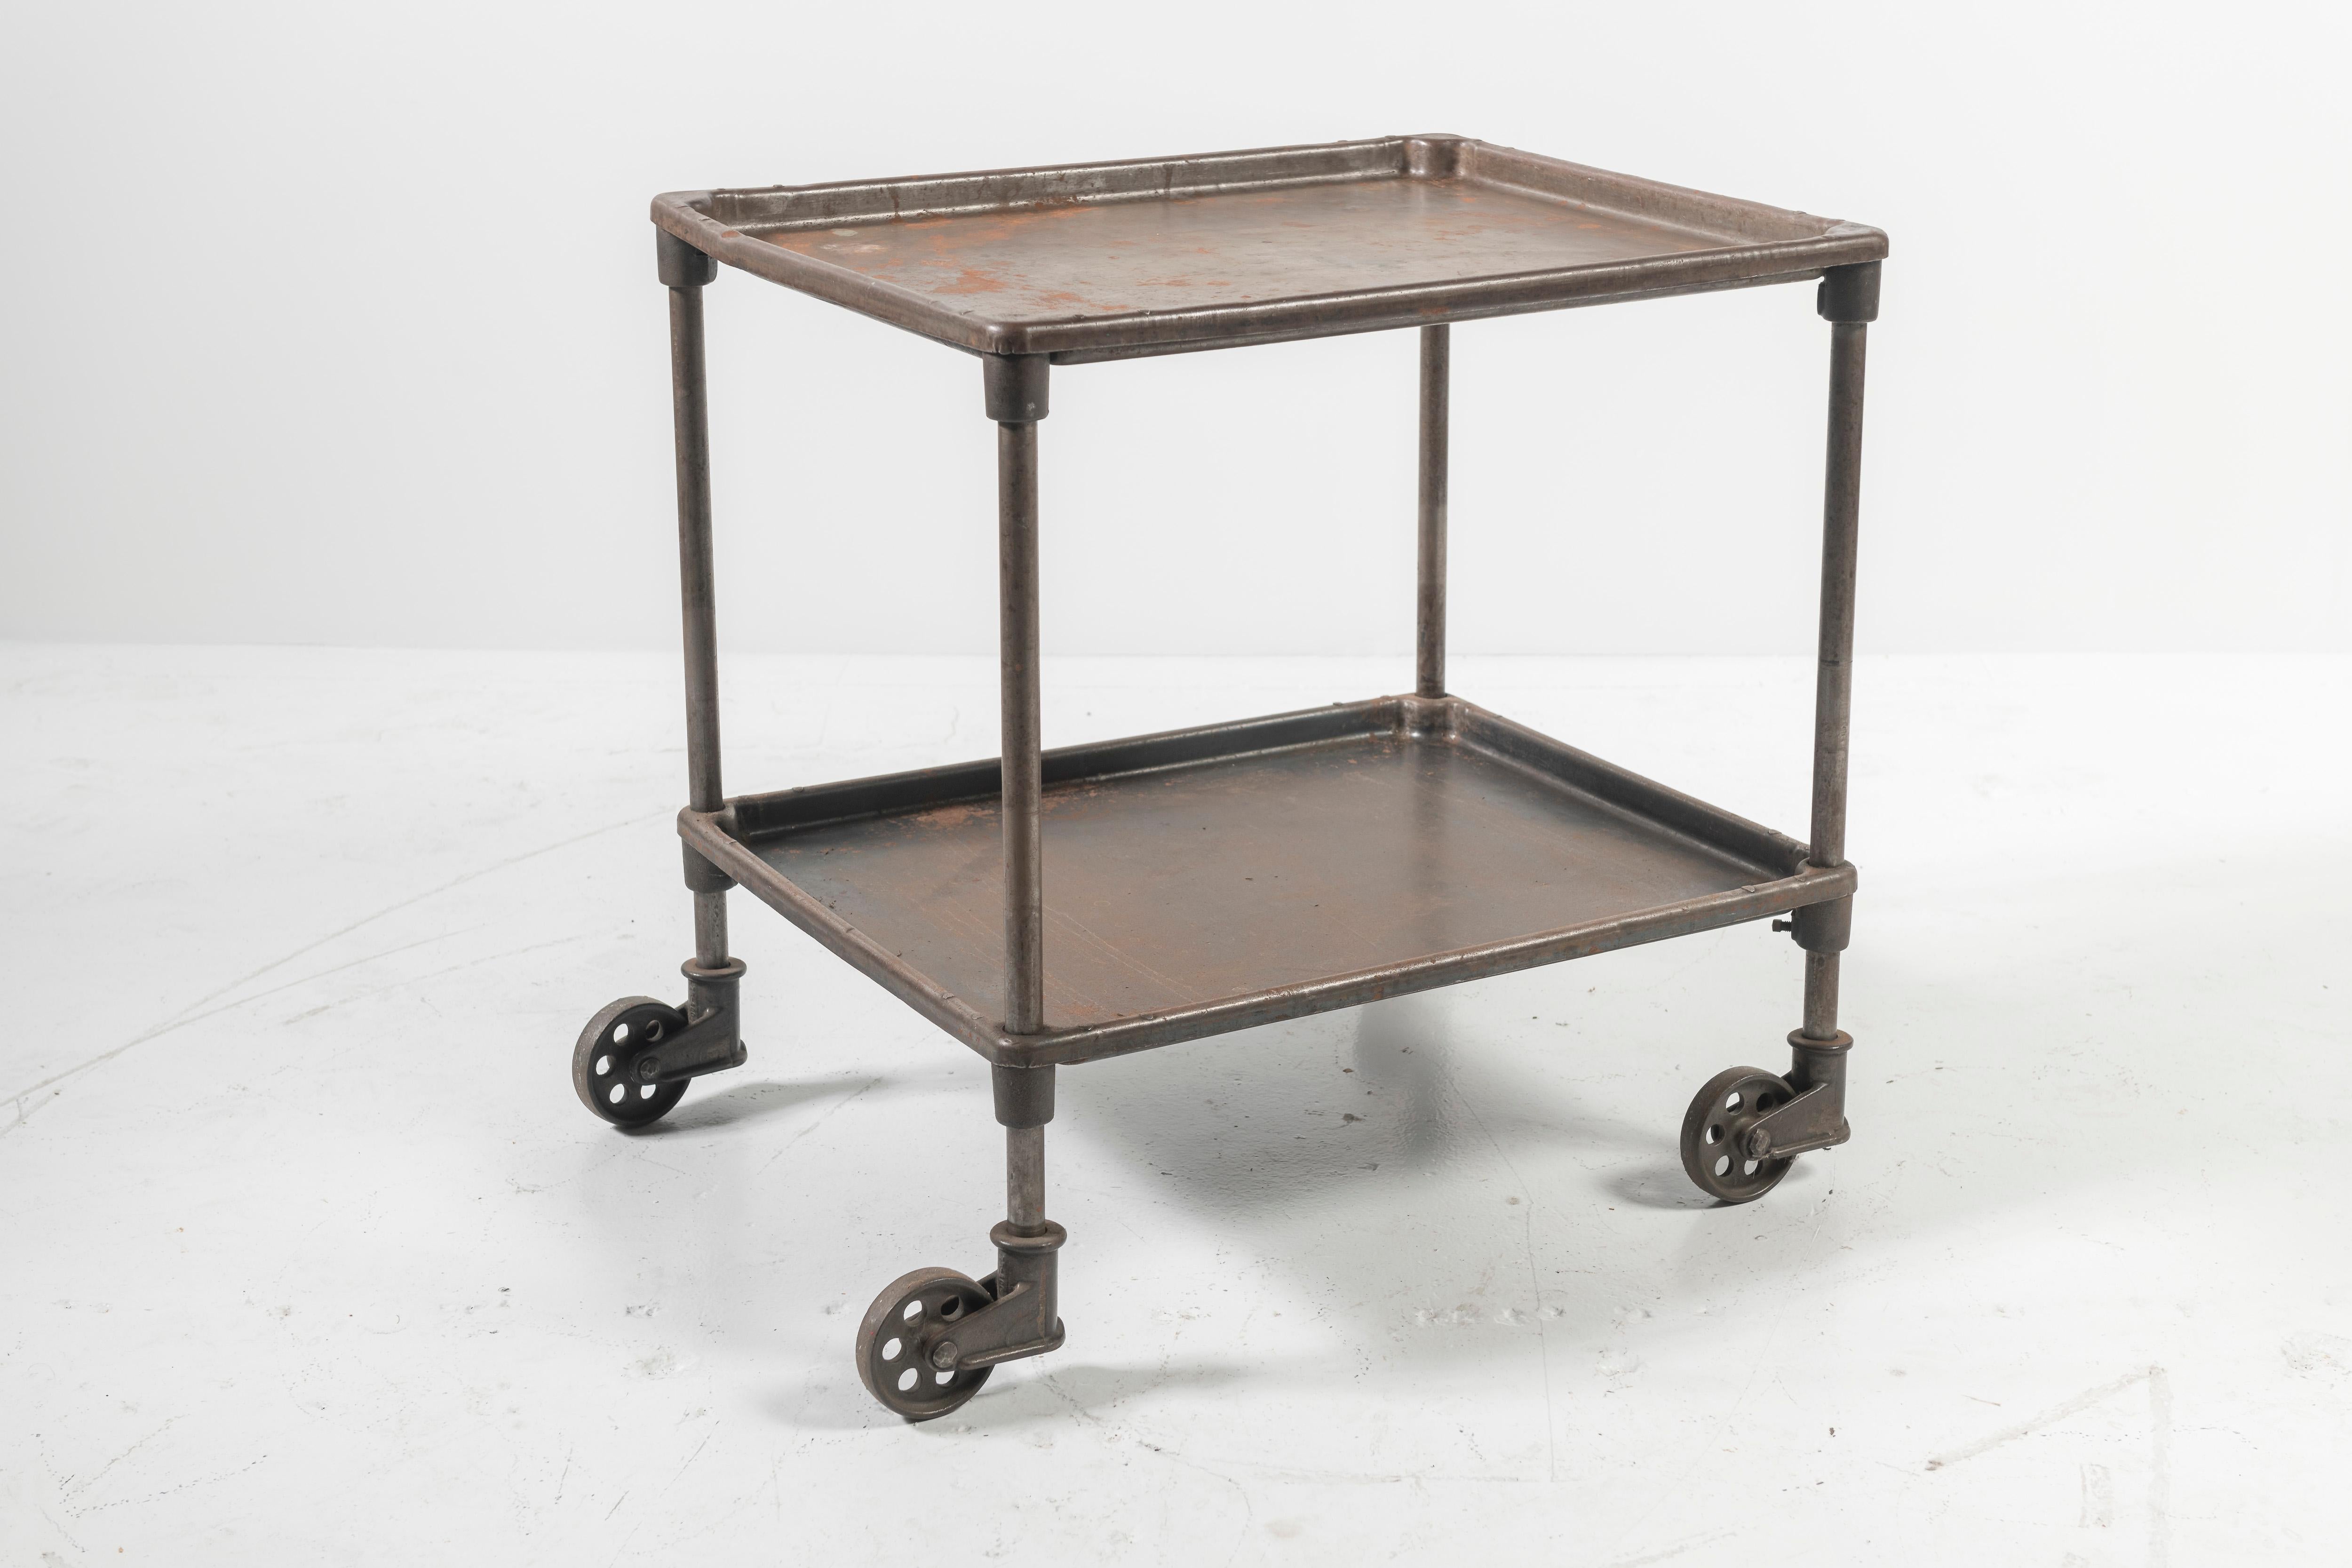 Vintage industrial machinist cart on wheels. All the metal has an aged patina. Wheels easily to where you need it, such as a bar cart.